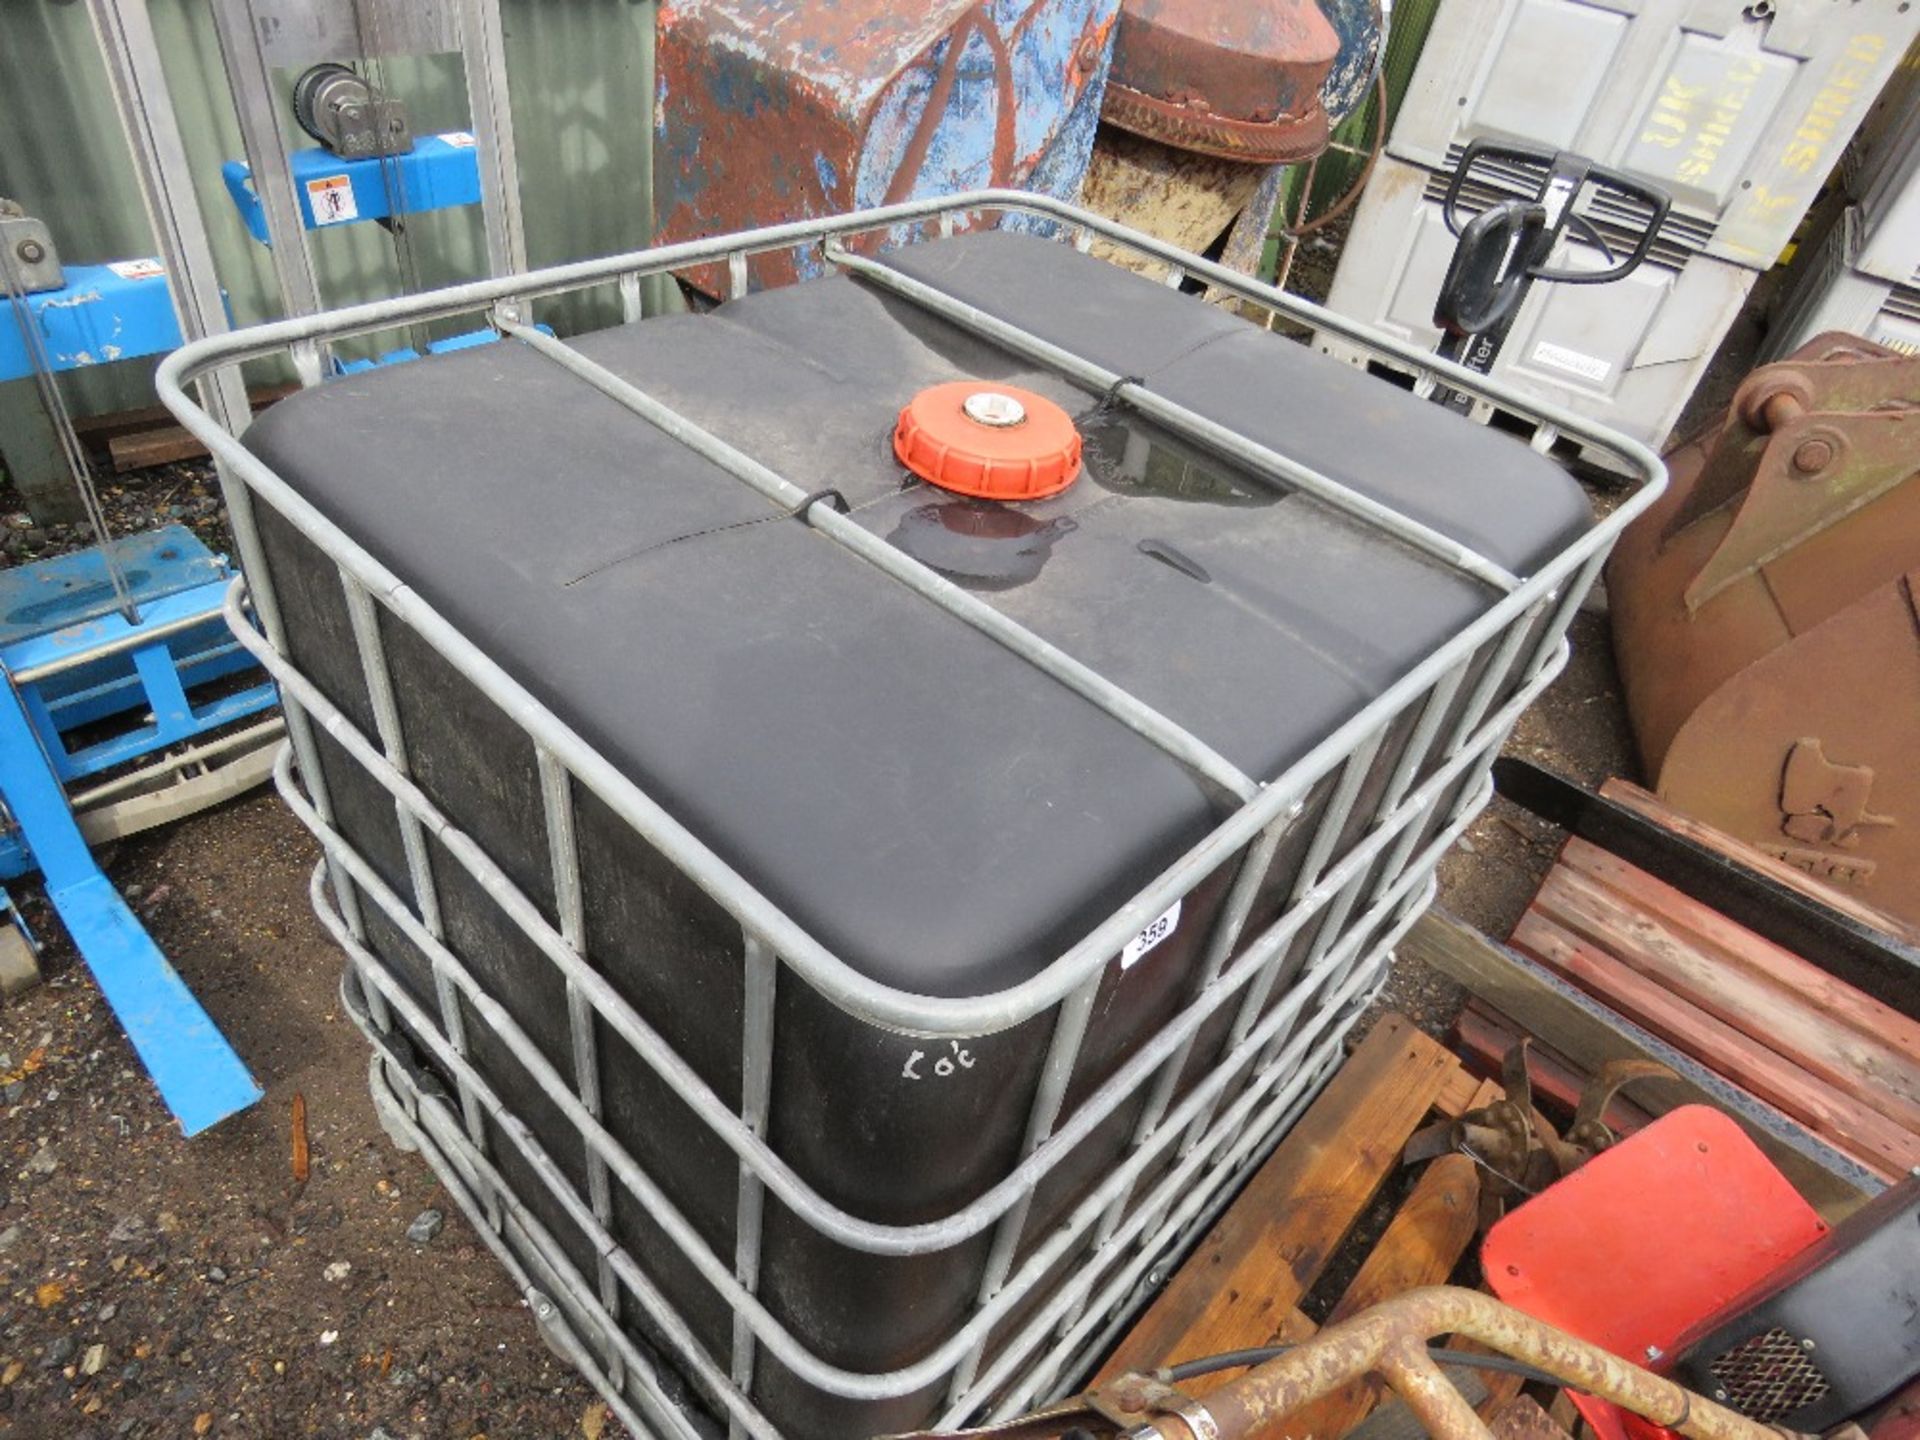 IBC STORAGE CONTAINER ON PALLET. THIS LOT IS SOLD UNDER THE AUCTIONEERS MARGIN SCHEME, THEREFORE NO - Image 2 of 2